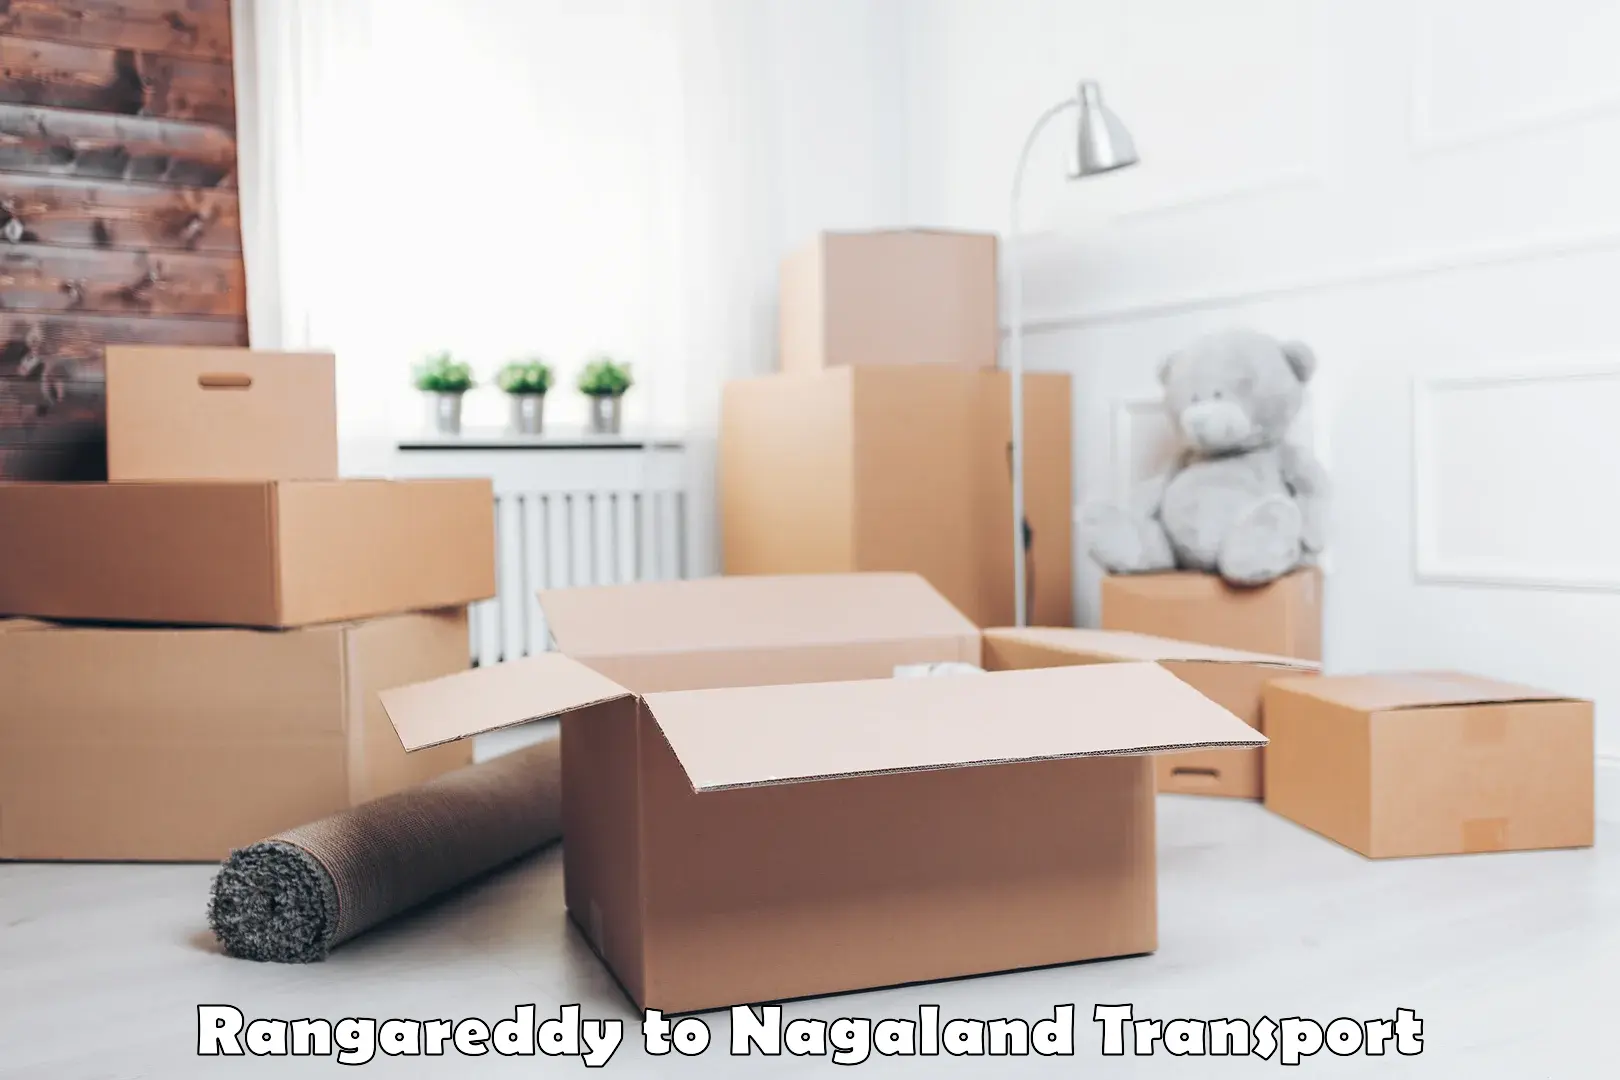 Nearby transport service Rangareddy to NIT Nagaland